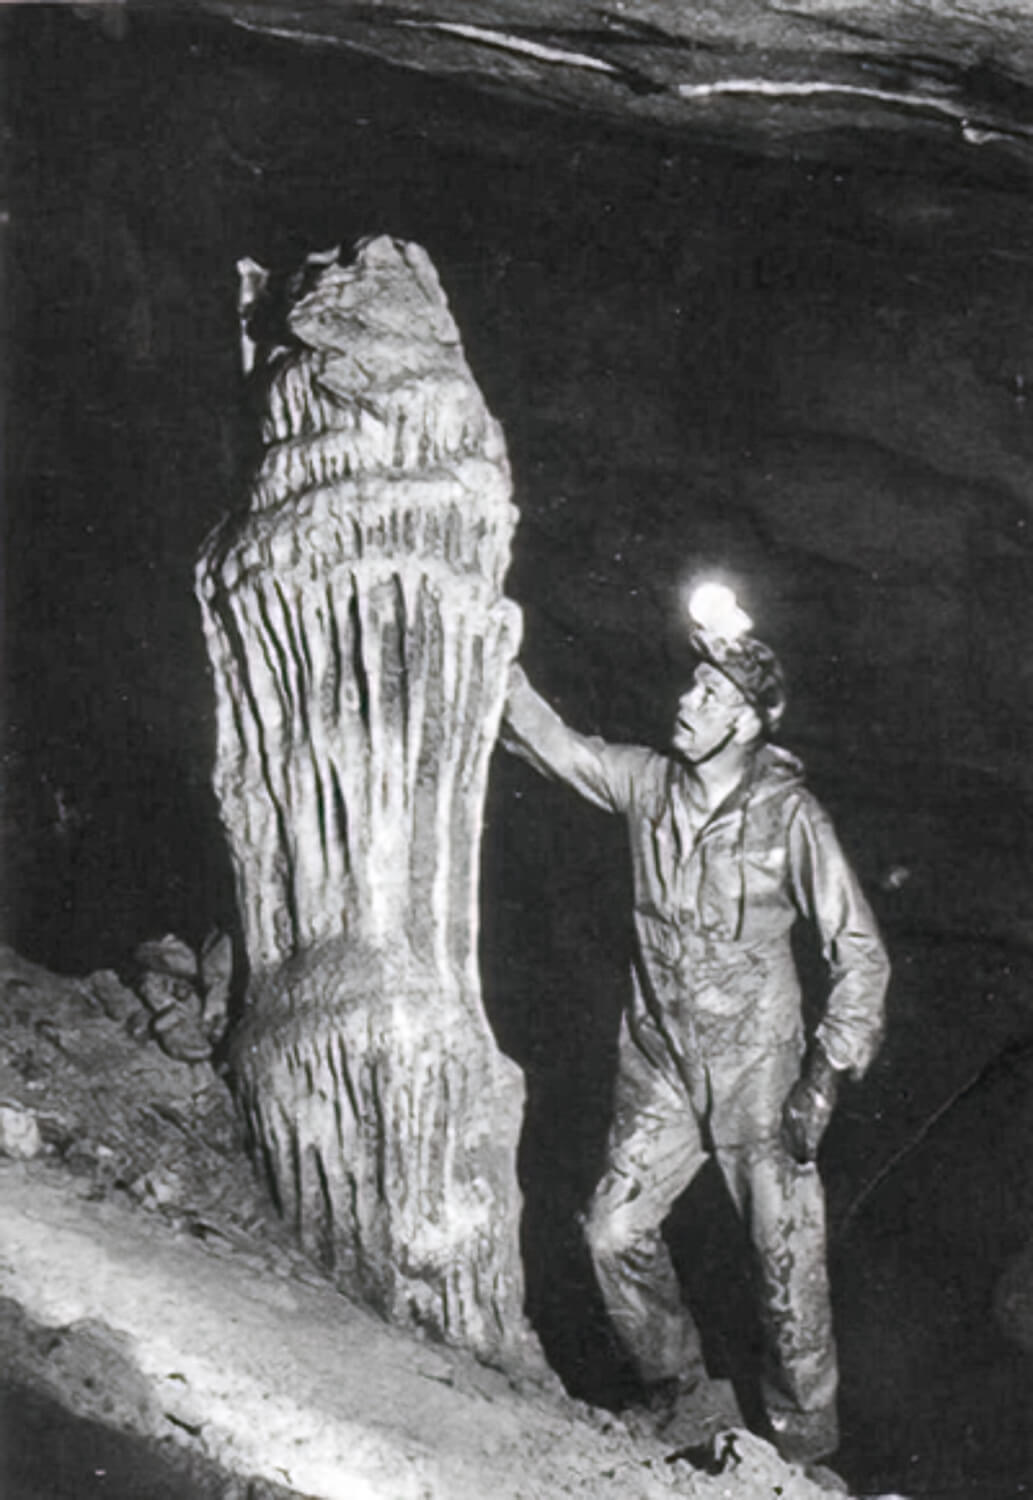 Neil Armstrong observing a huge stalagmite